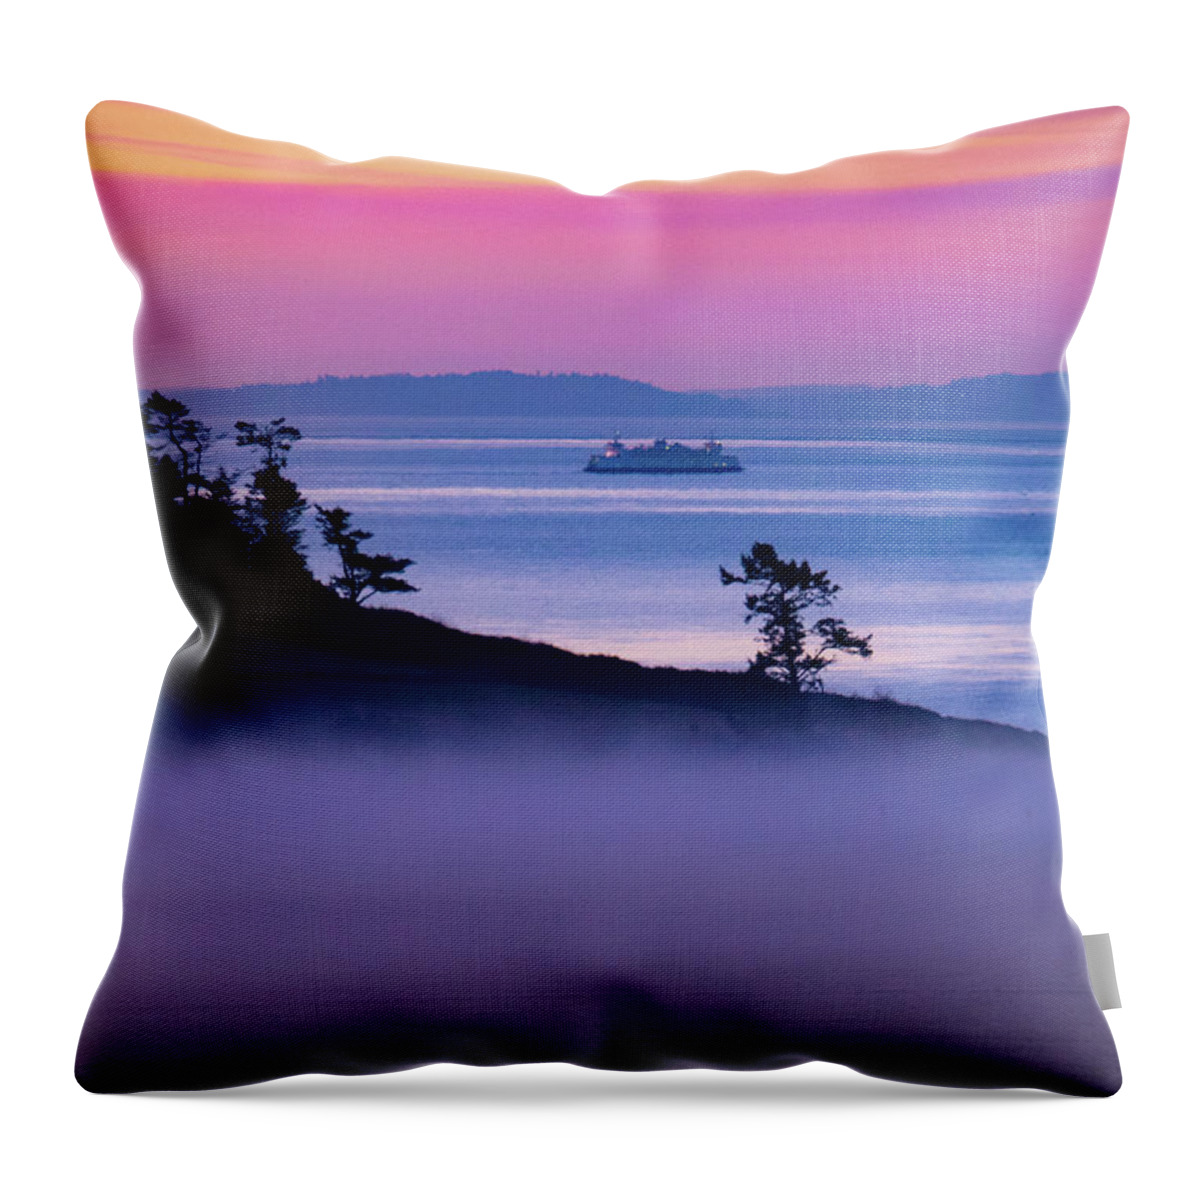 Ferry Throw Pillow featuring the photograph Magical Morning Commute by Leslie Struxness